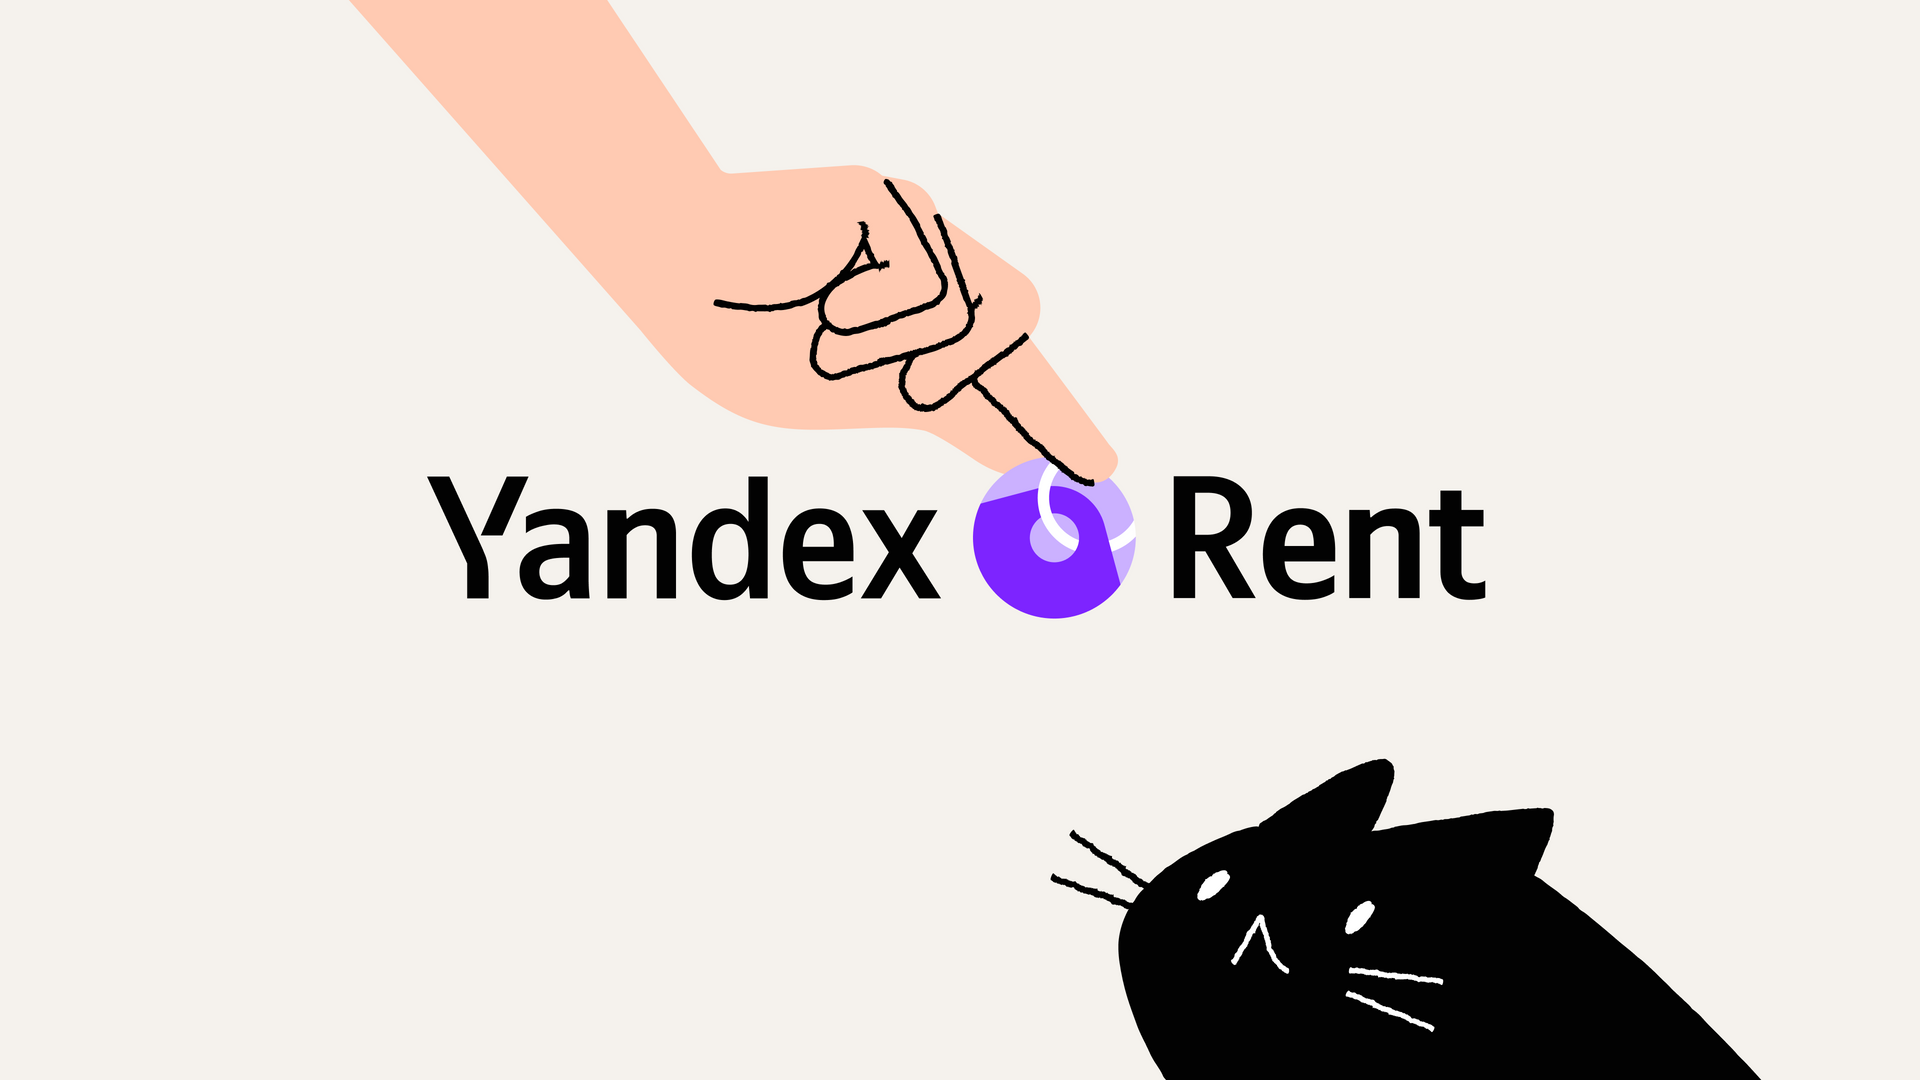 Reliable and relatable brand identity for a hassle-free rental service